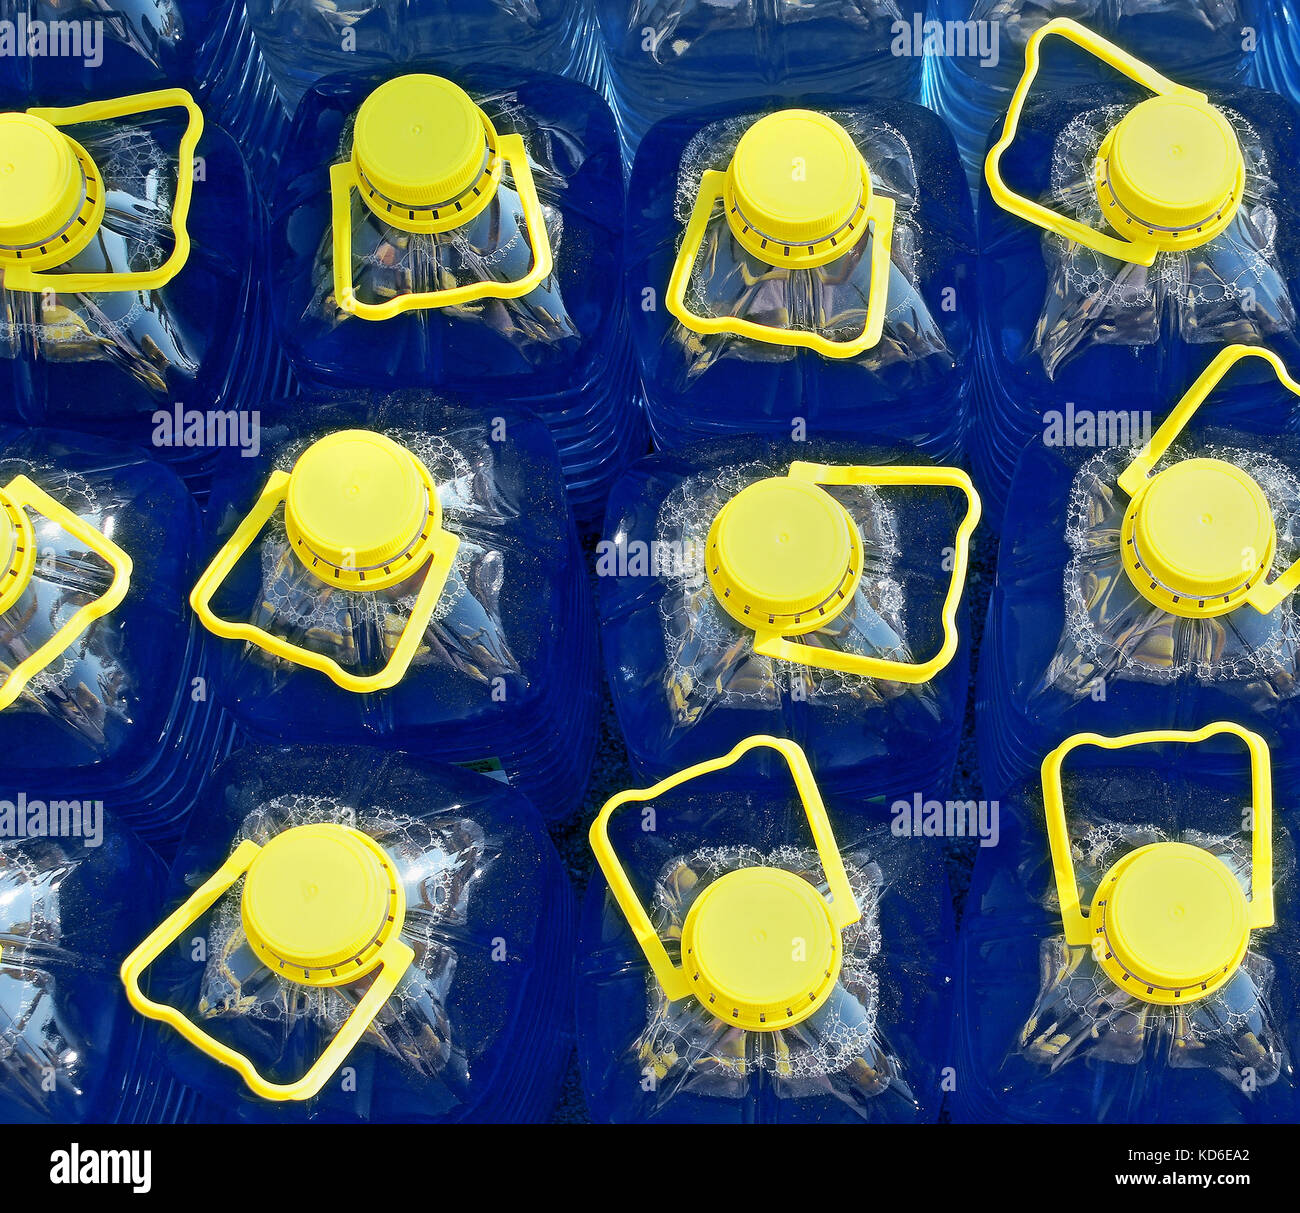 Download Closed Plastic Containers With Blue Liquid And Yellow Caps Stock Photo Alamy Yellowimages Mockups